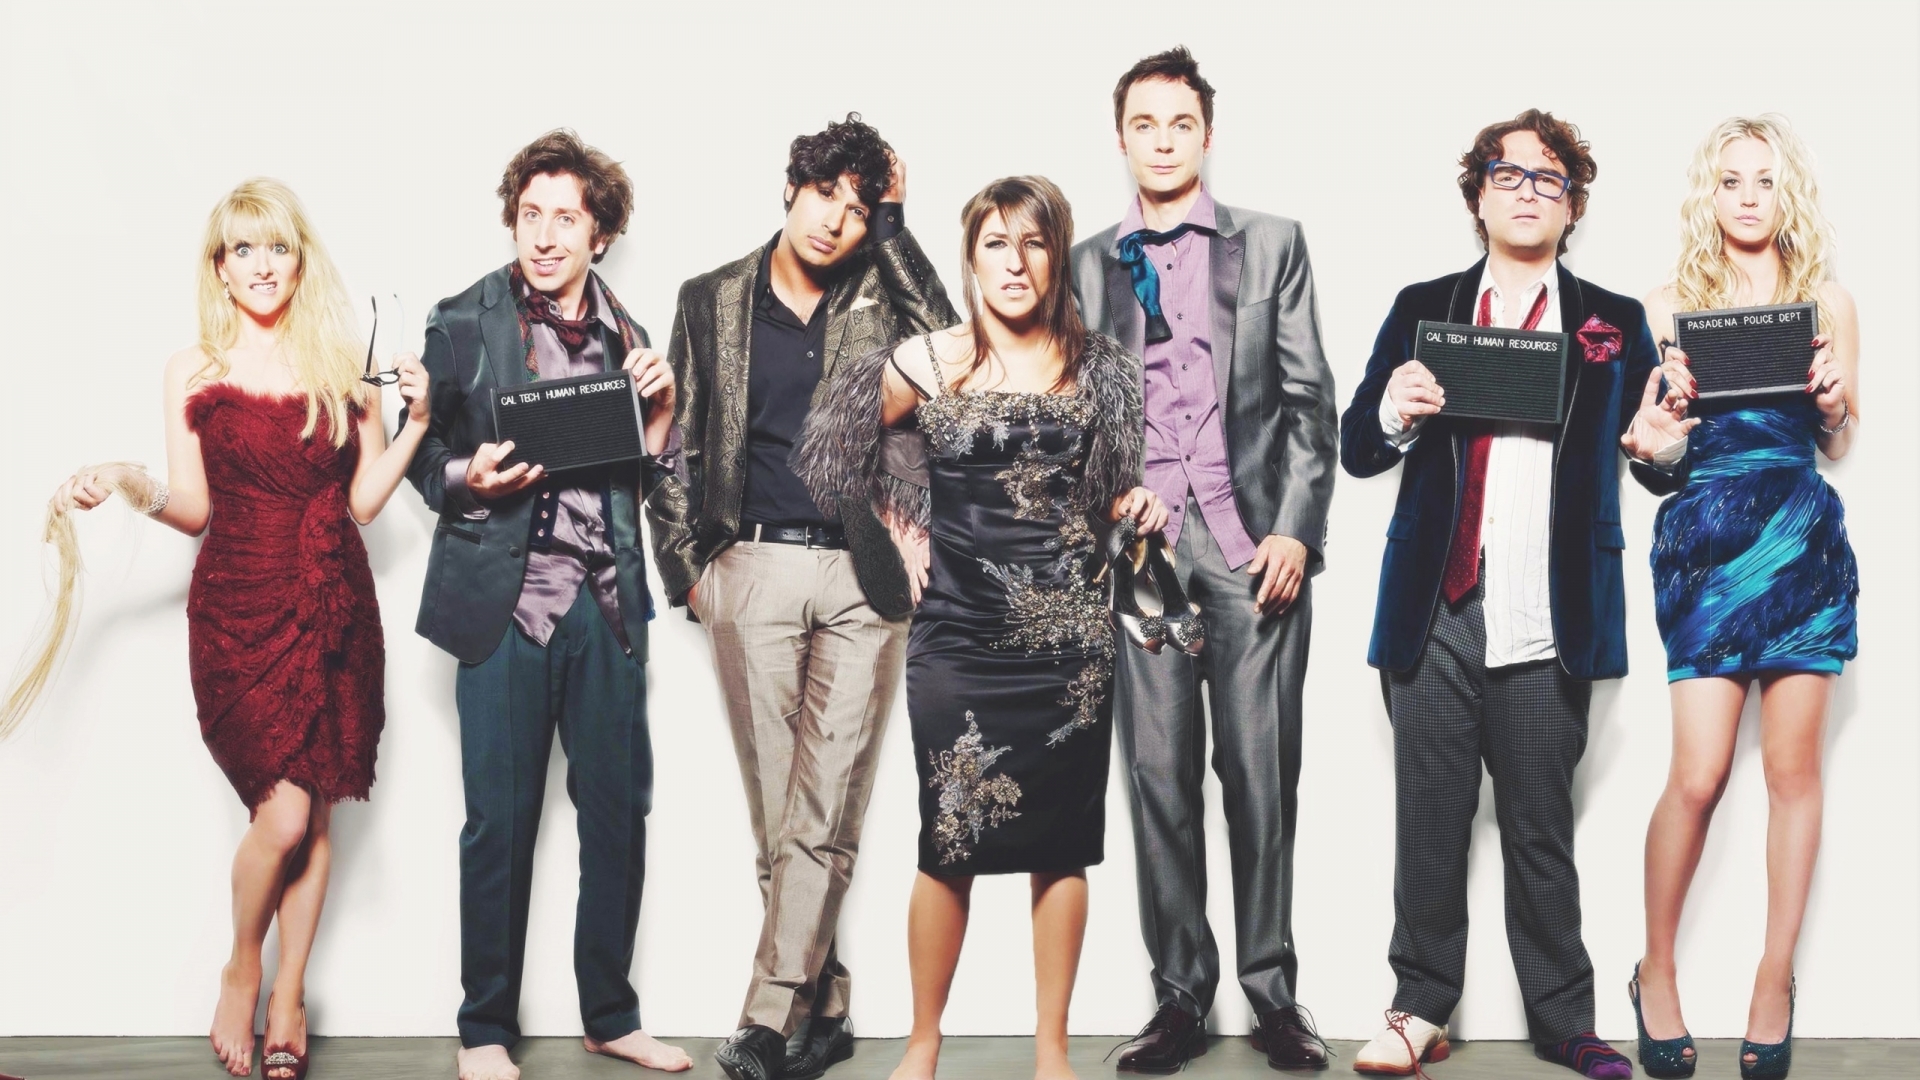 The Big Bang Theory Cast for 1920 x 1080 HDTV 1080p resolution